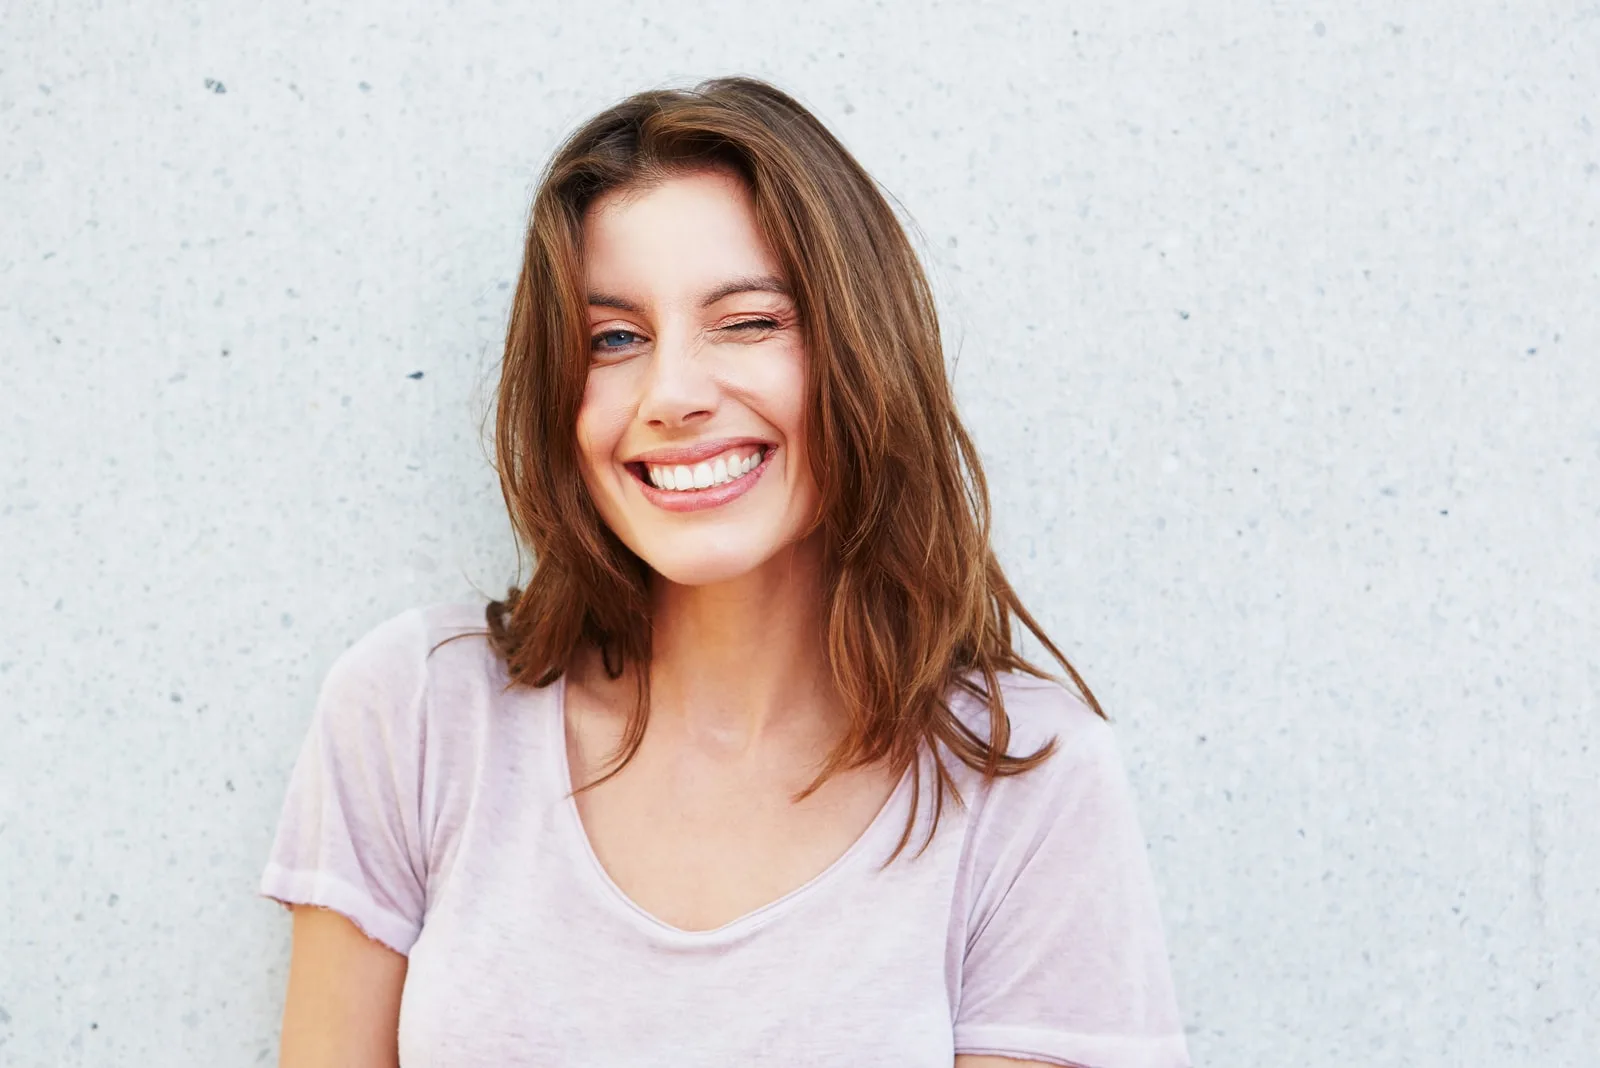 portrait of happy young woman smiling